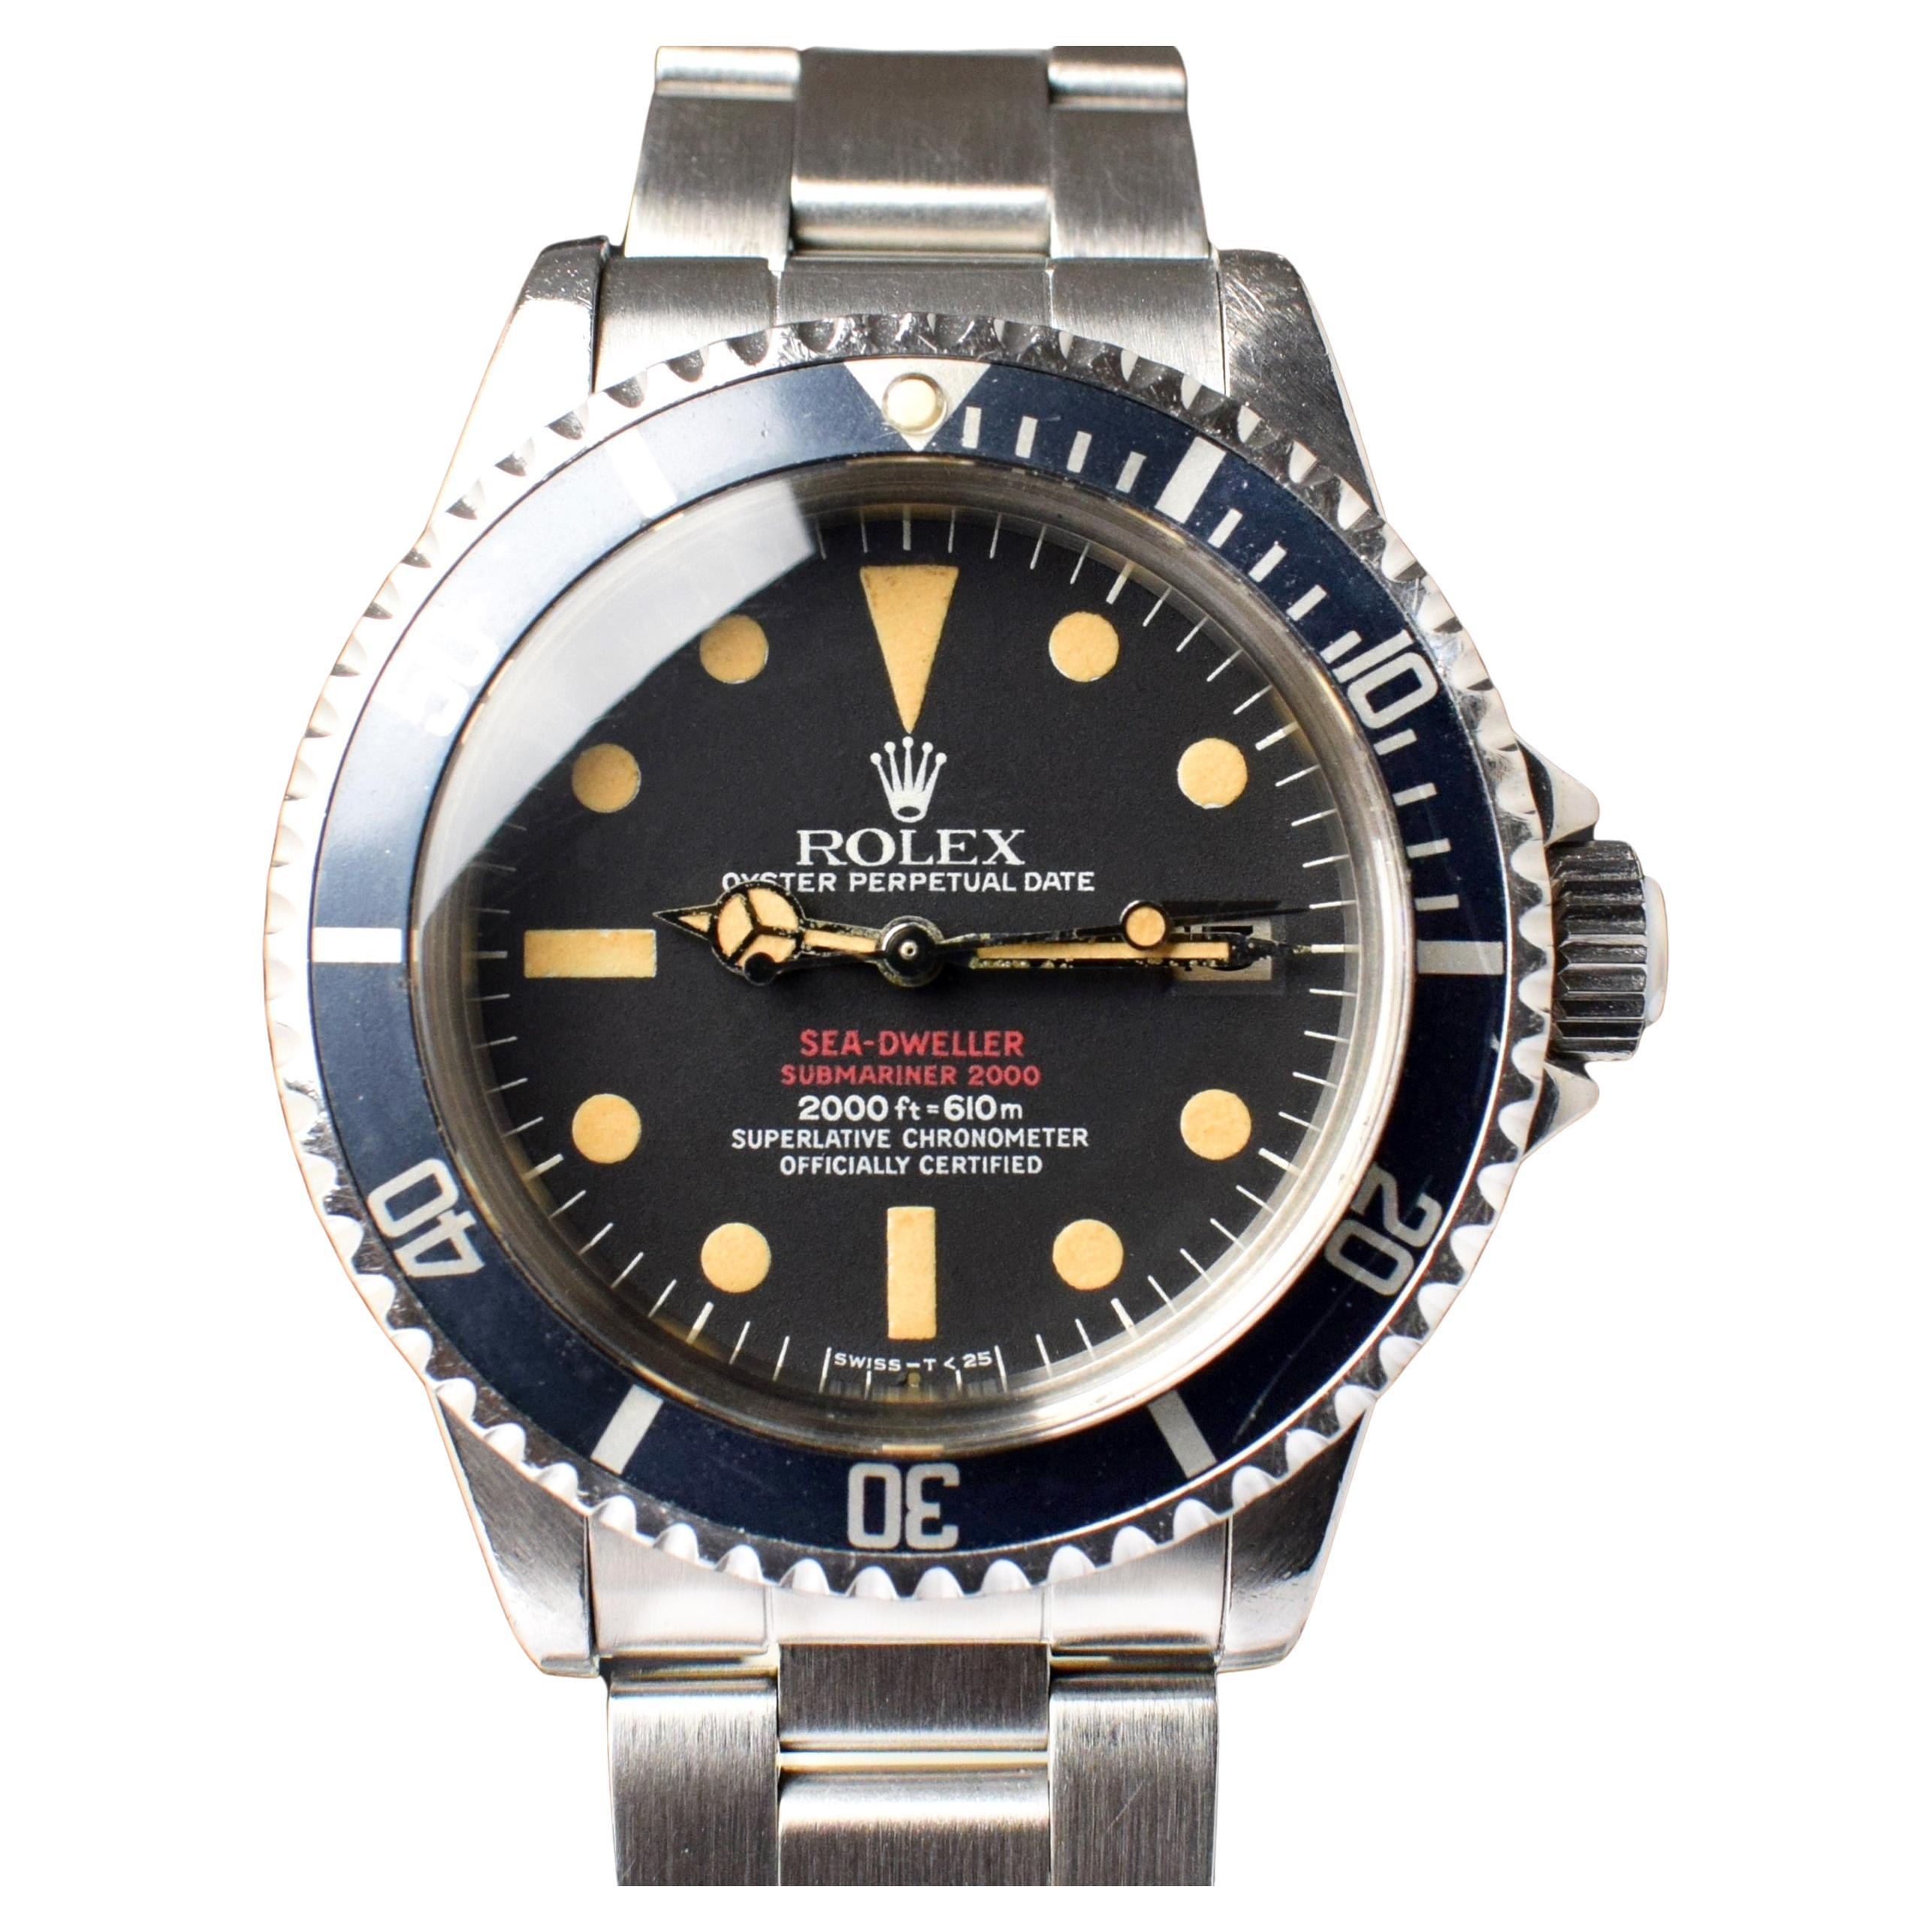 Rolex Double Red Sea-Dweller DRSD MK IV 1665 Steel Watch with Service Paper 1974